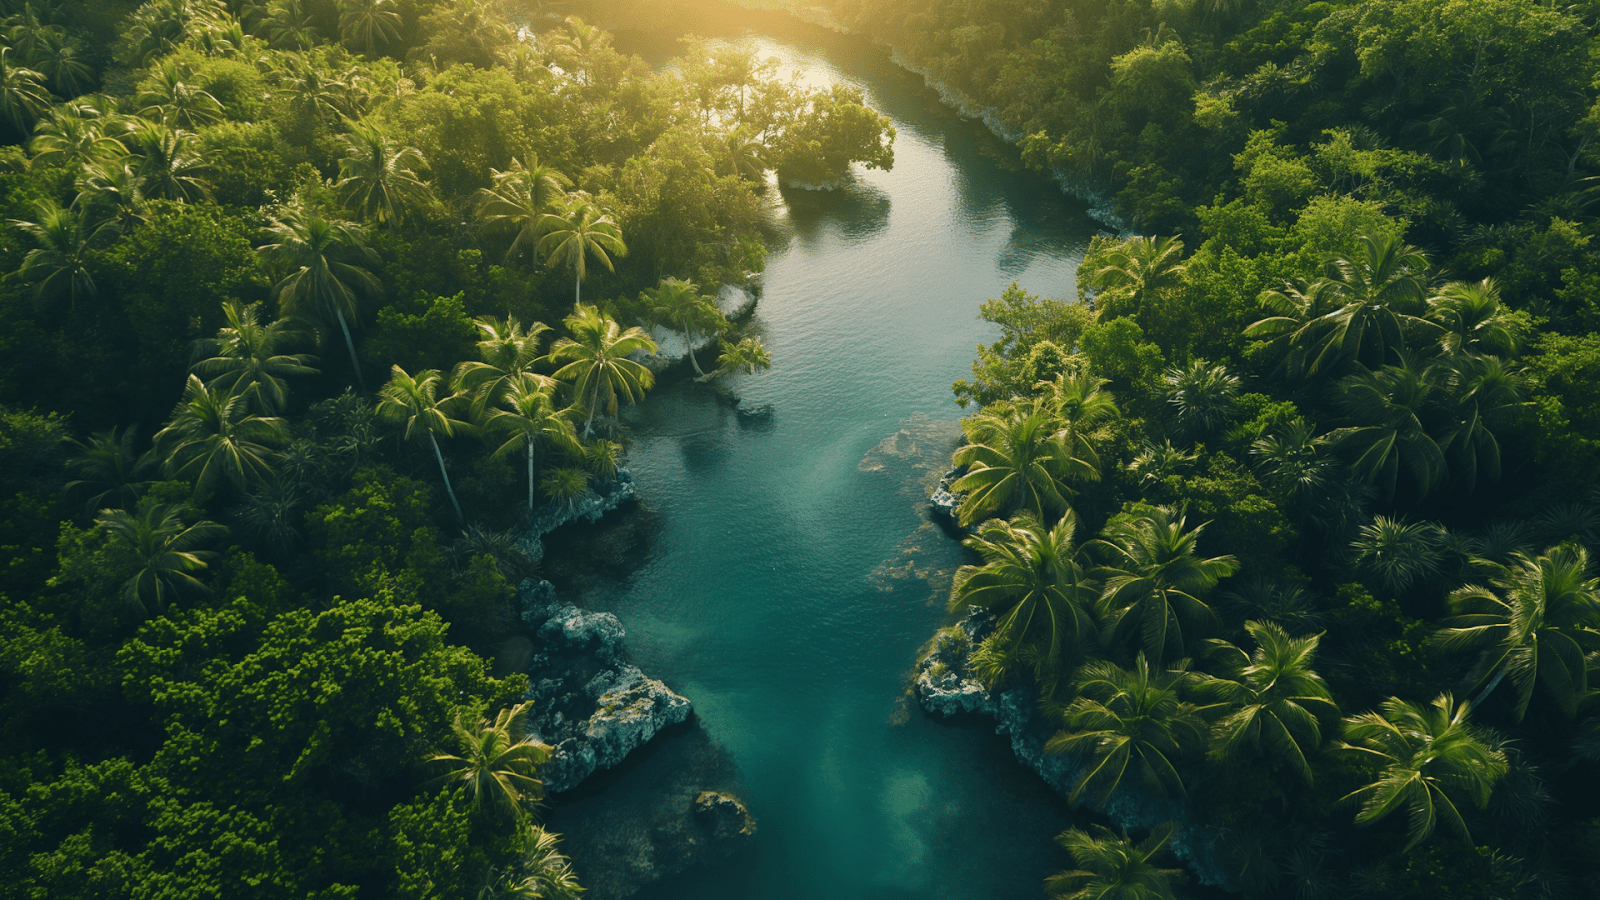 Overhead shot of a serene river snaking through Tulum's lush greenery, showcasing a tranquil and secure getaway destination